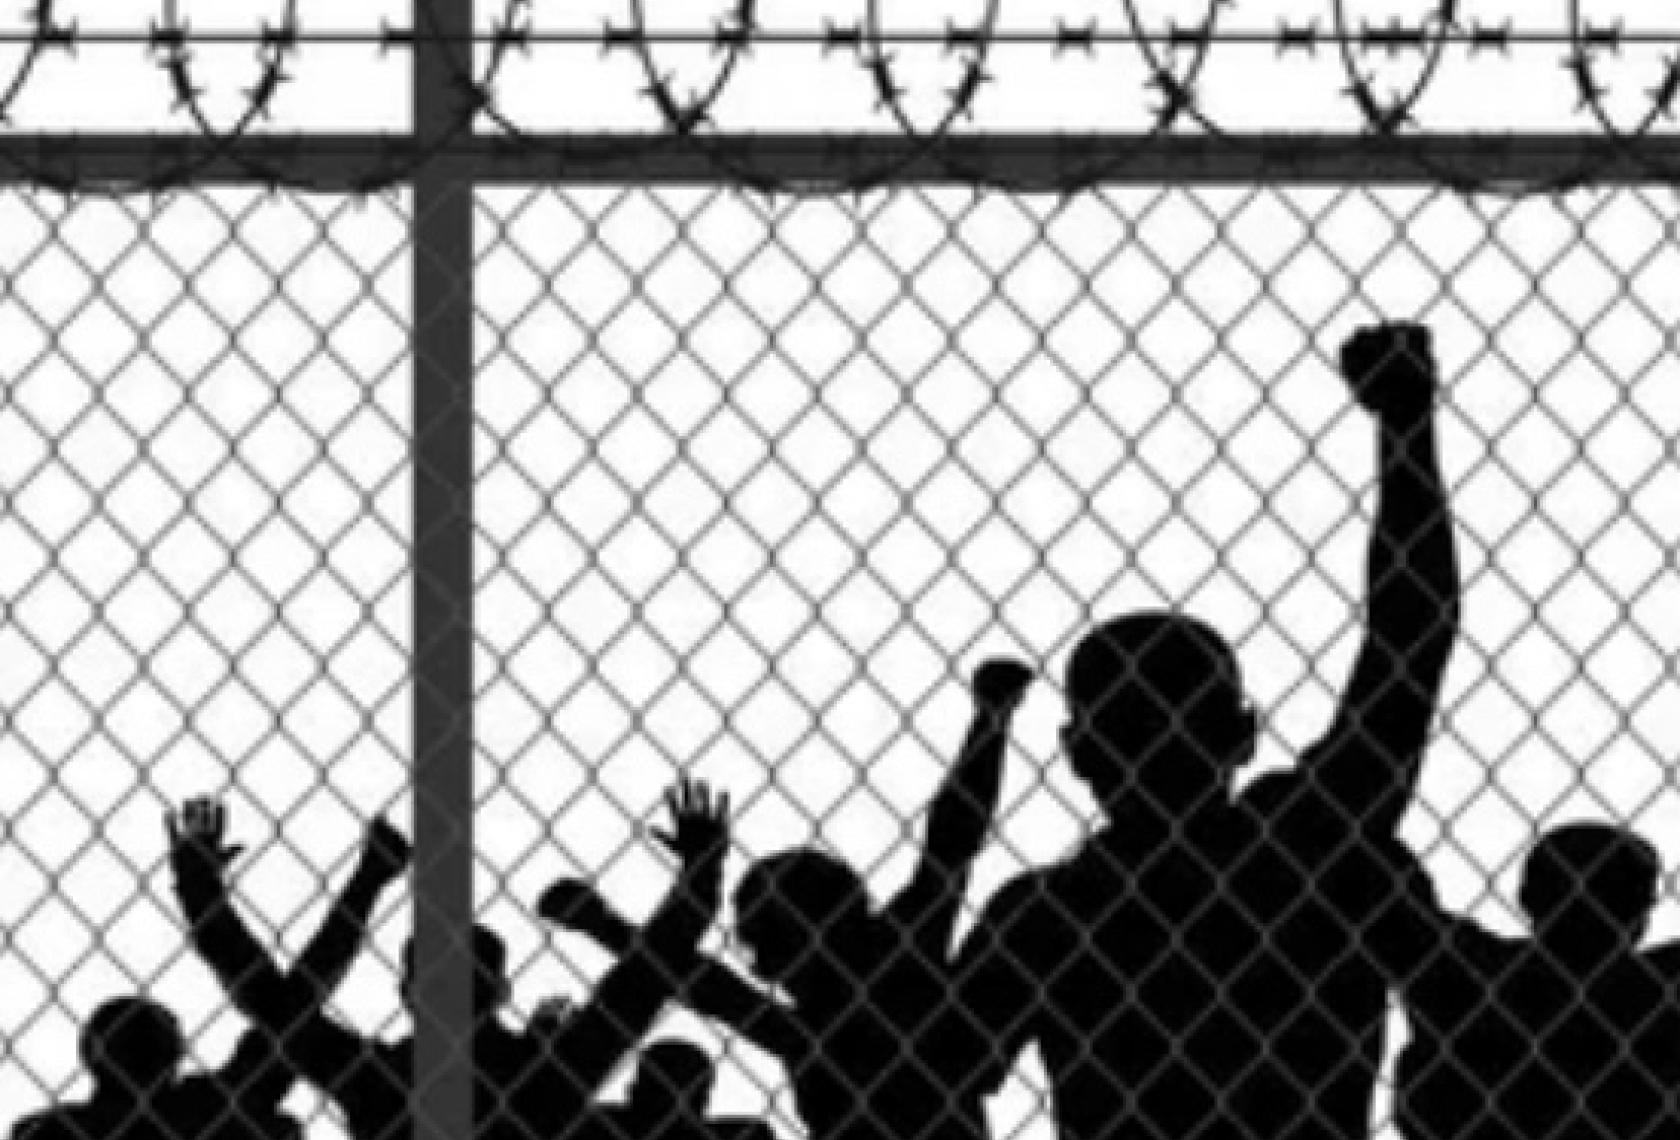 people with arms raised behind a wired fence in black and white